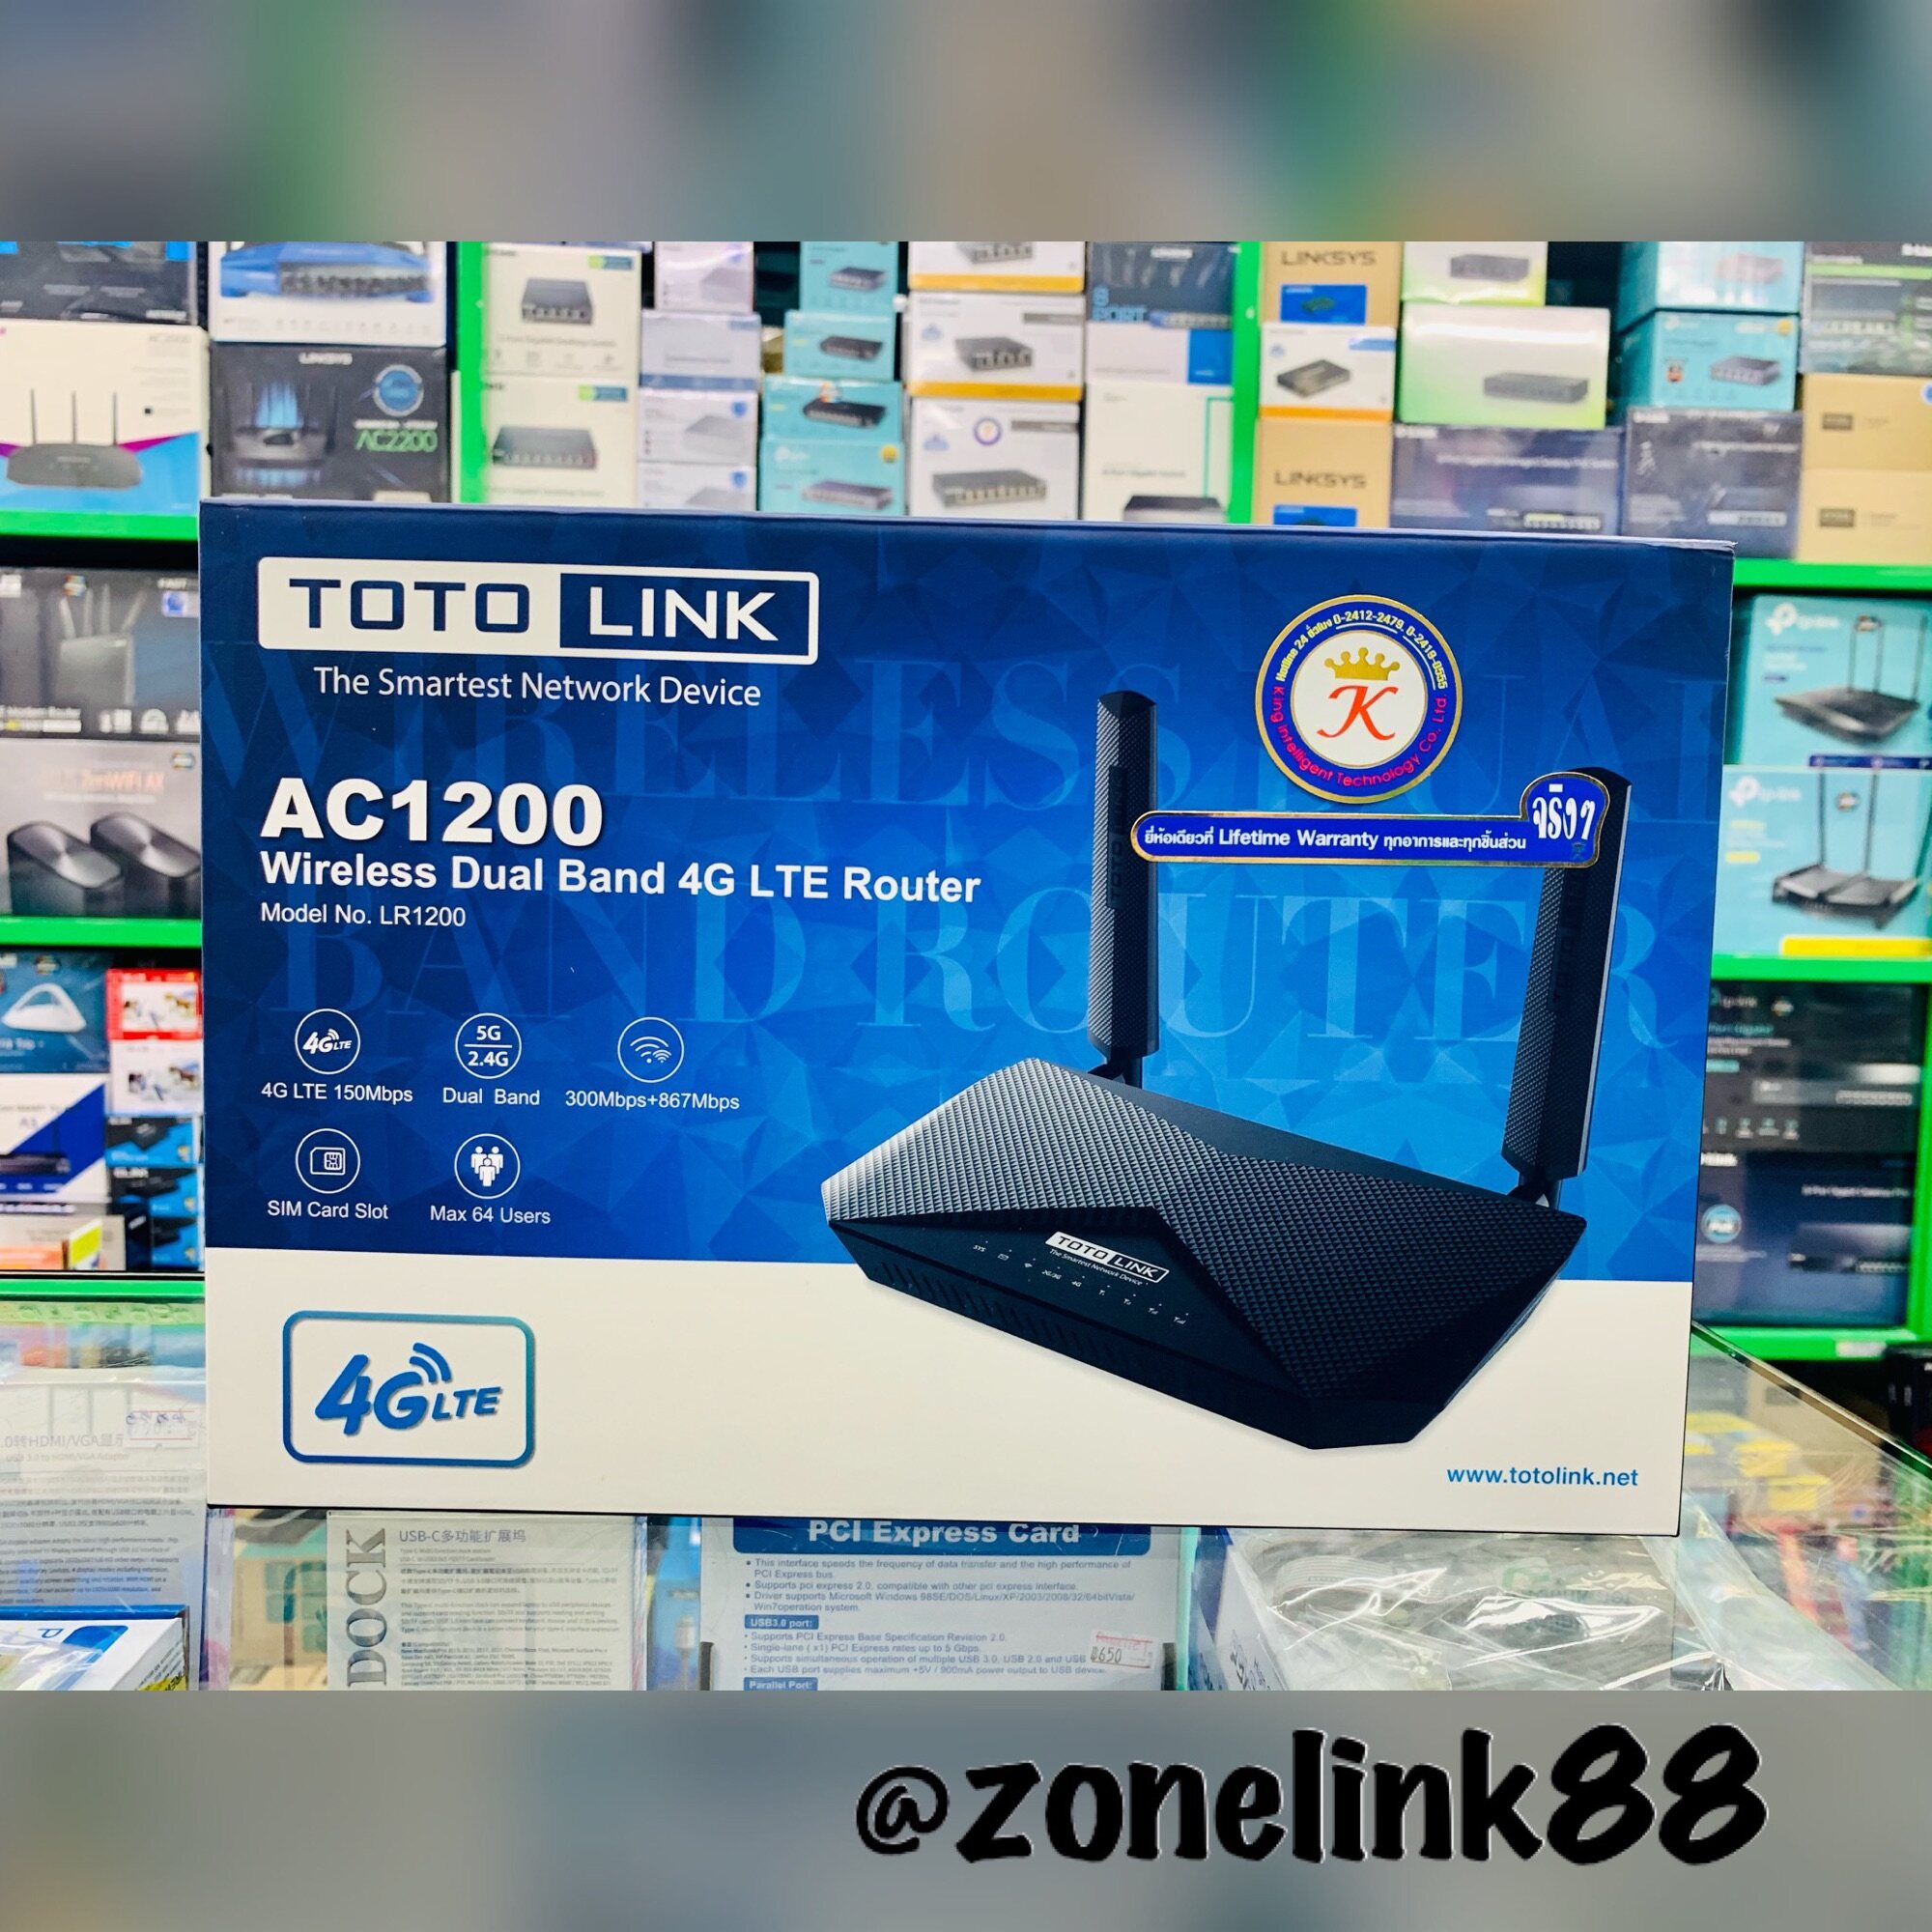 LR1200 - AC1200 Wireless Dual Band 4G LTE Router TOTOLINK